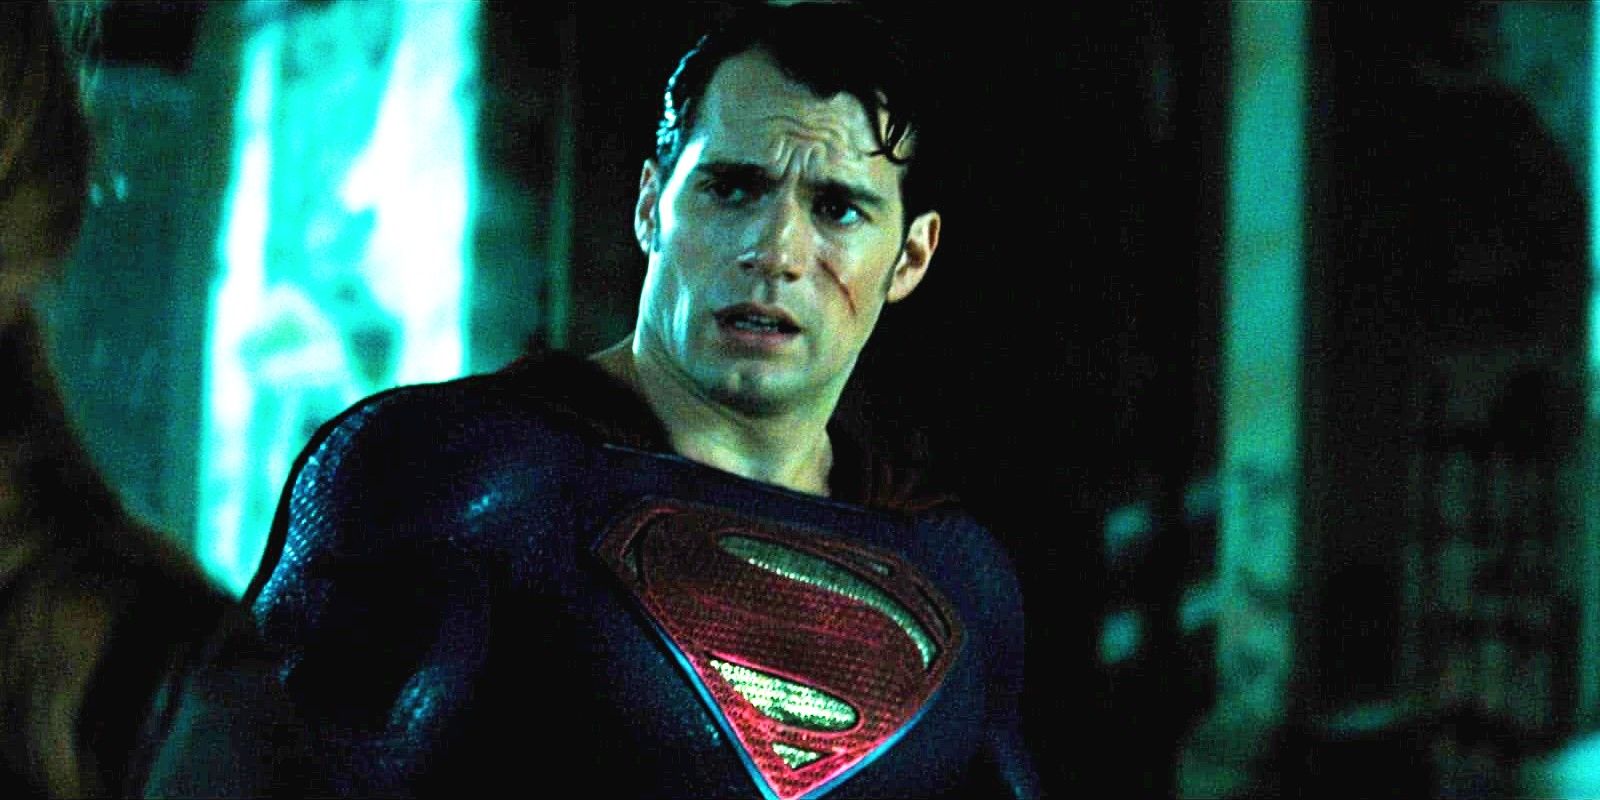 Henry Cavill's Superman looking sad in a scene from Batman V Superman Dawn of Justice.